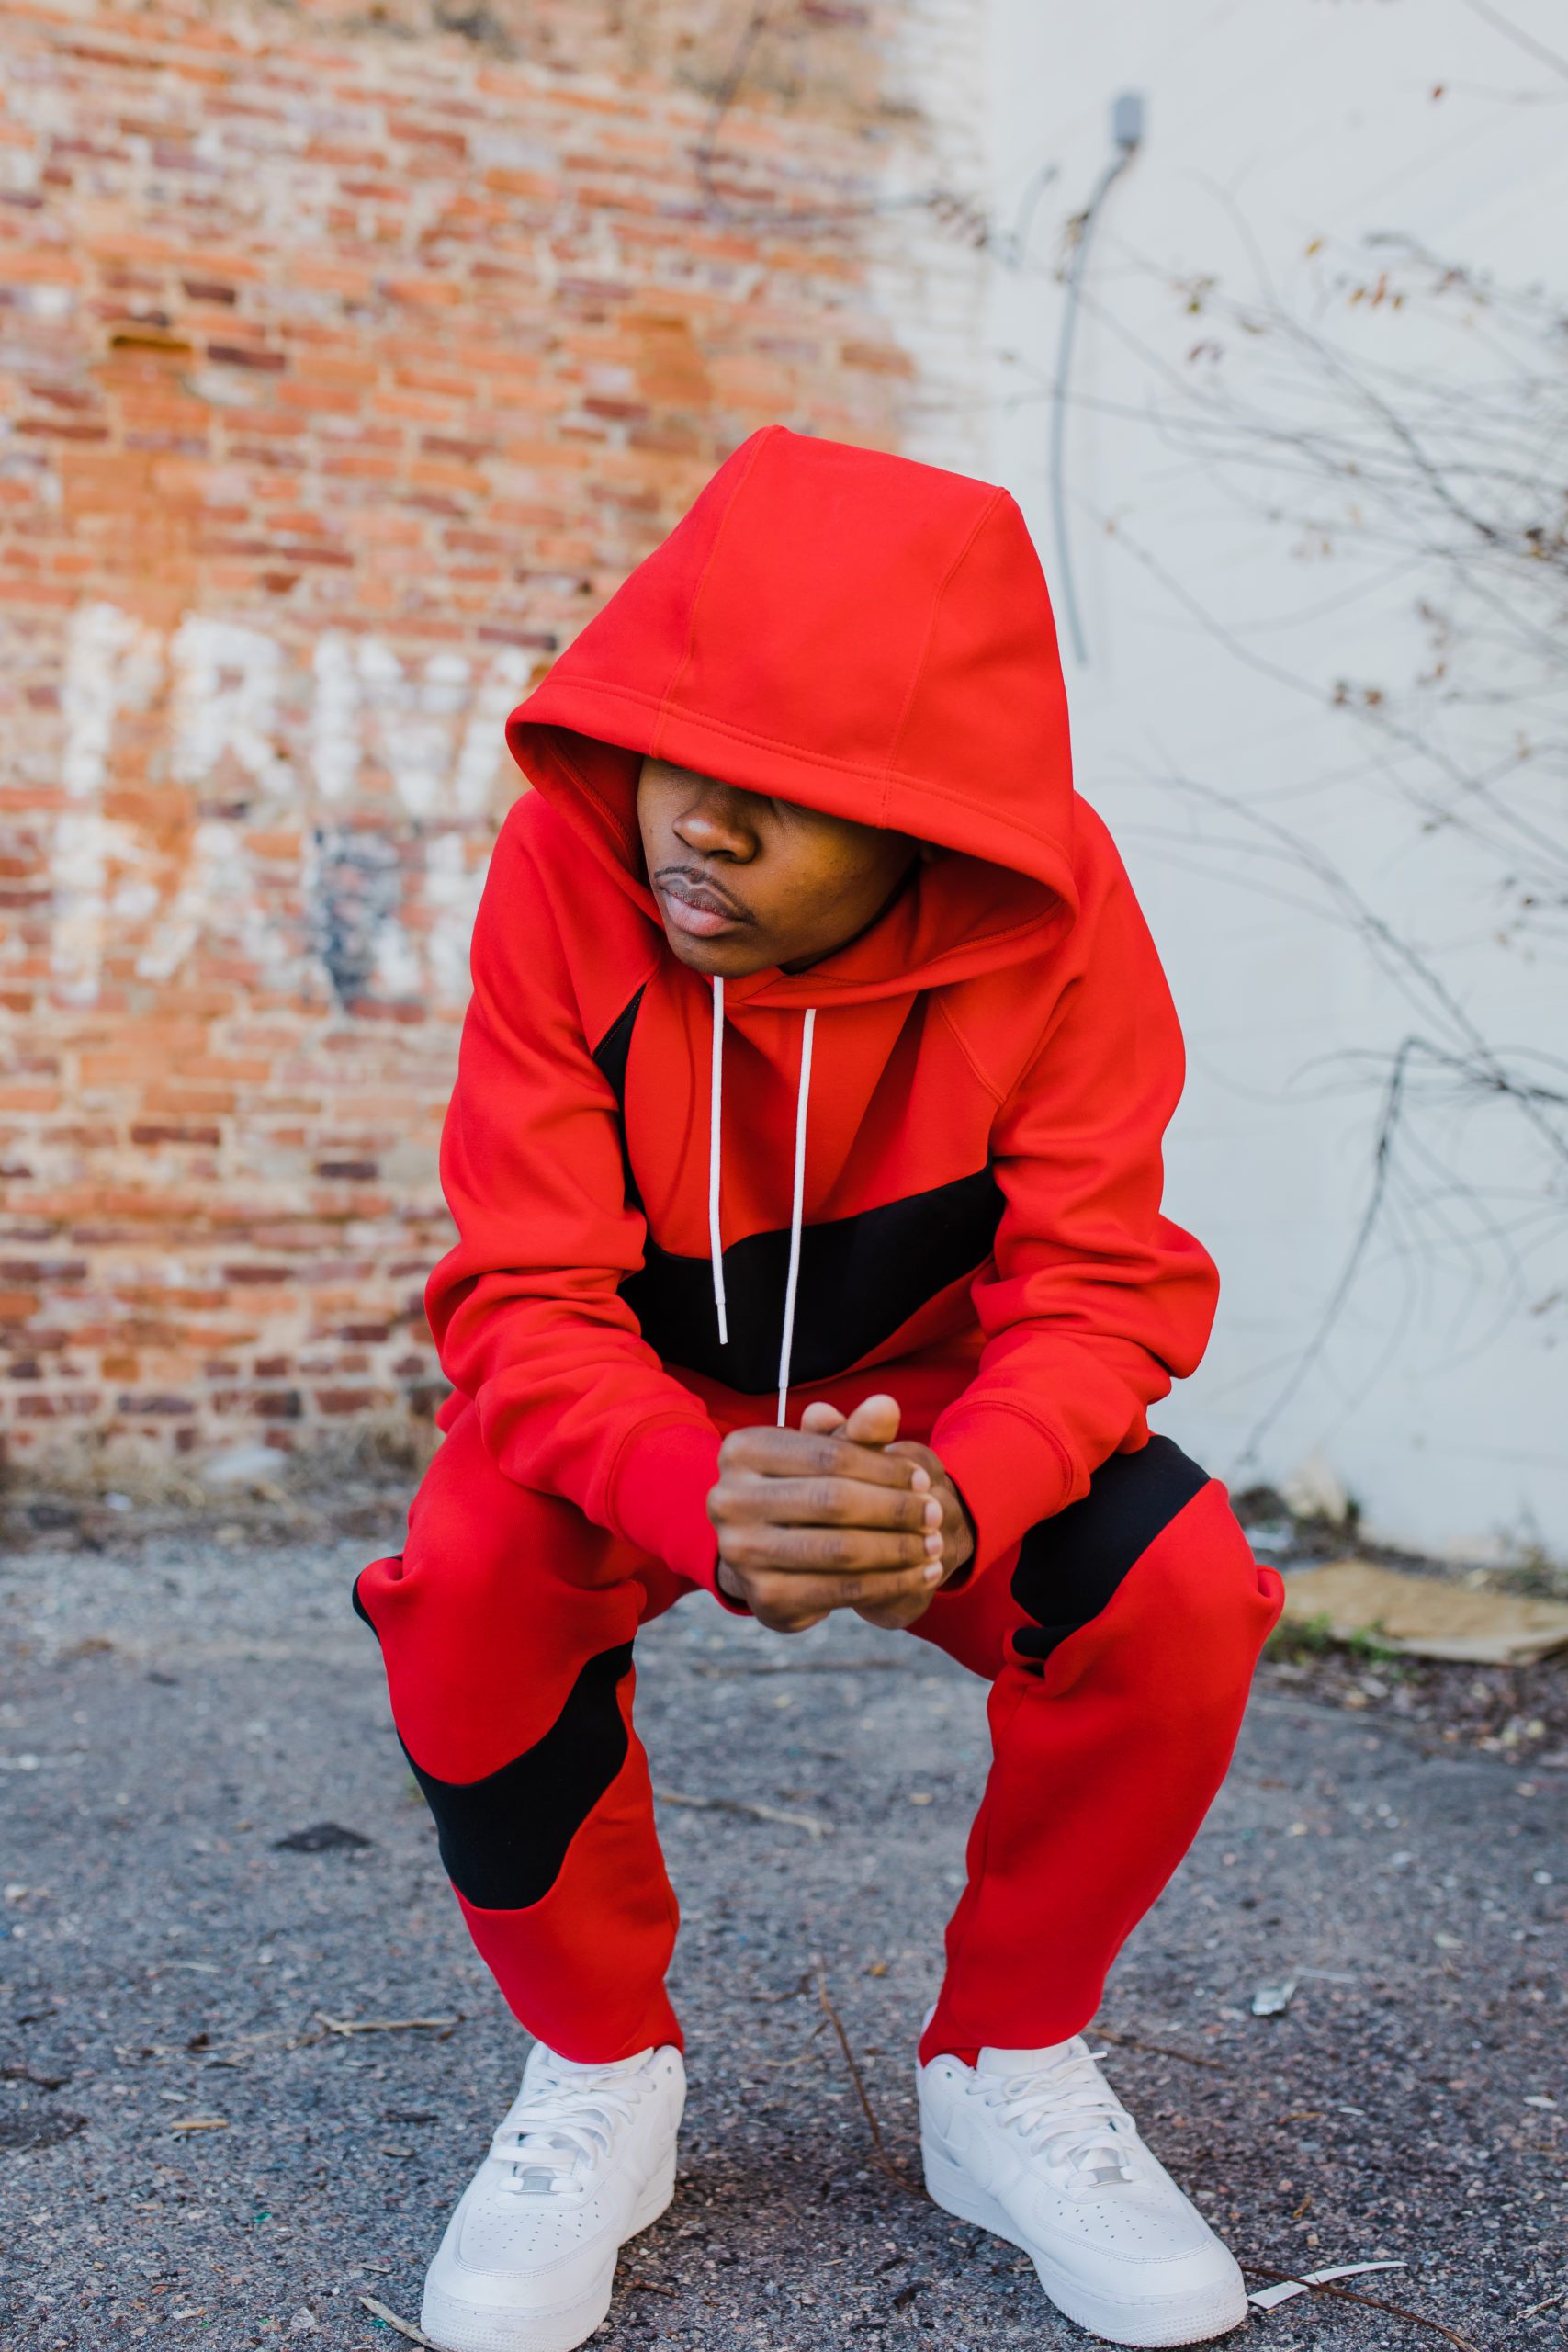 Augusta photographer captures boy in a red set crouching next to exposed brick